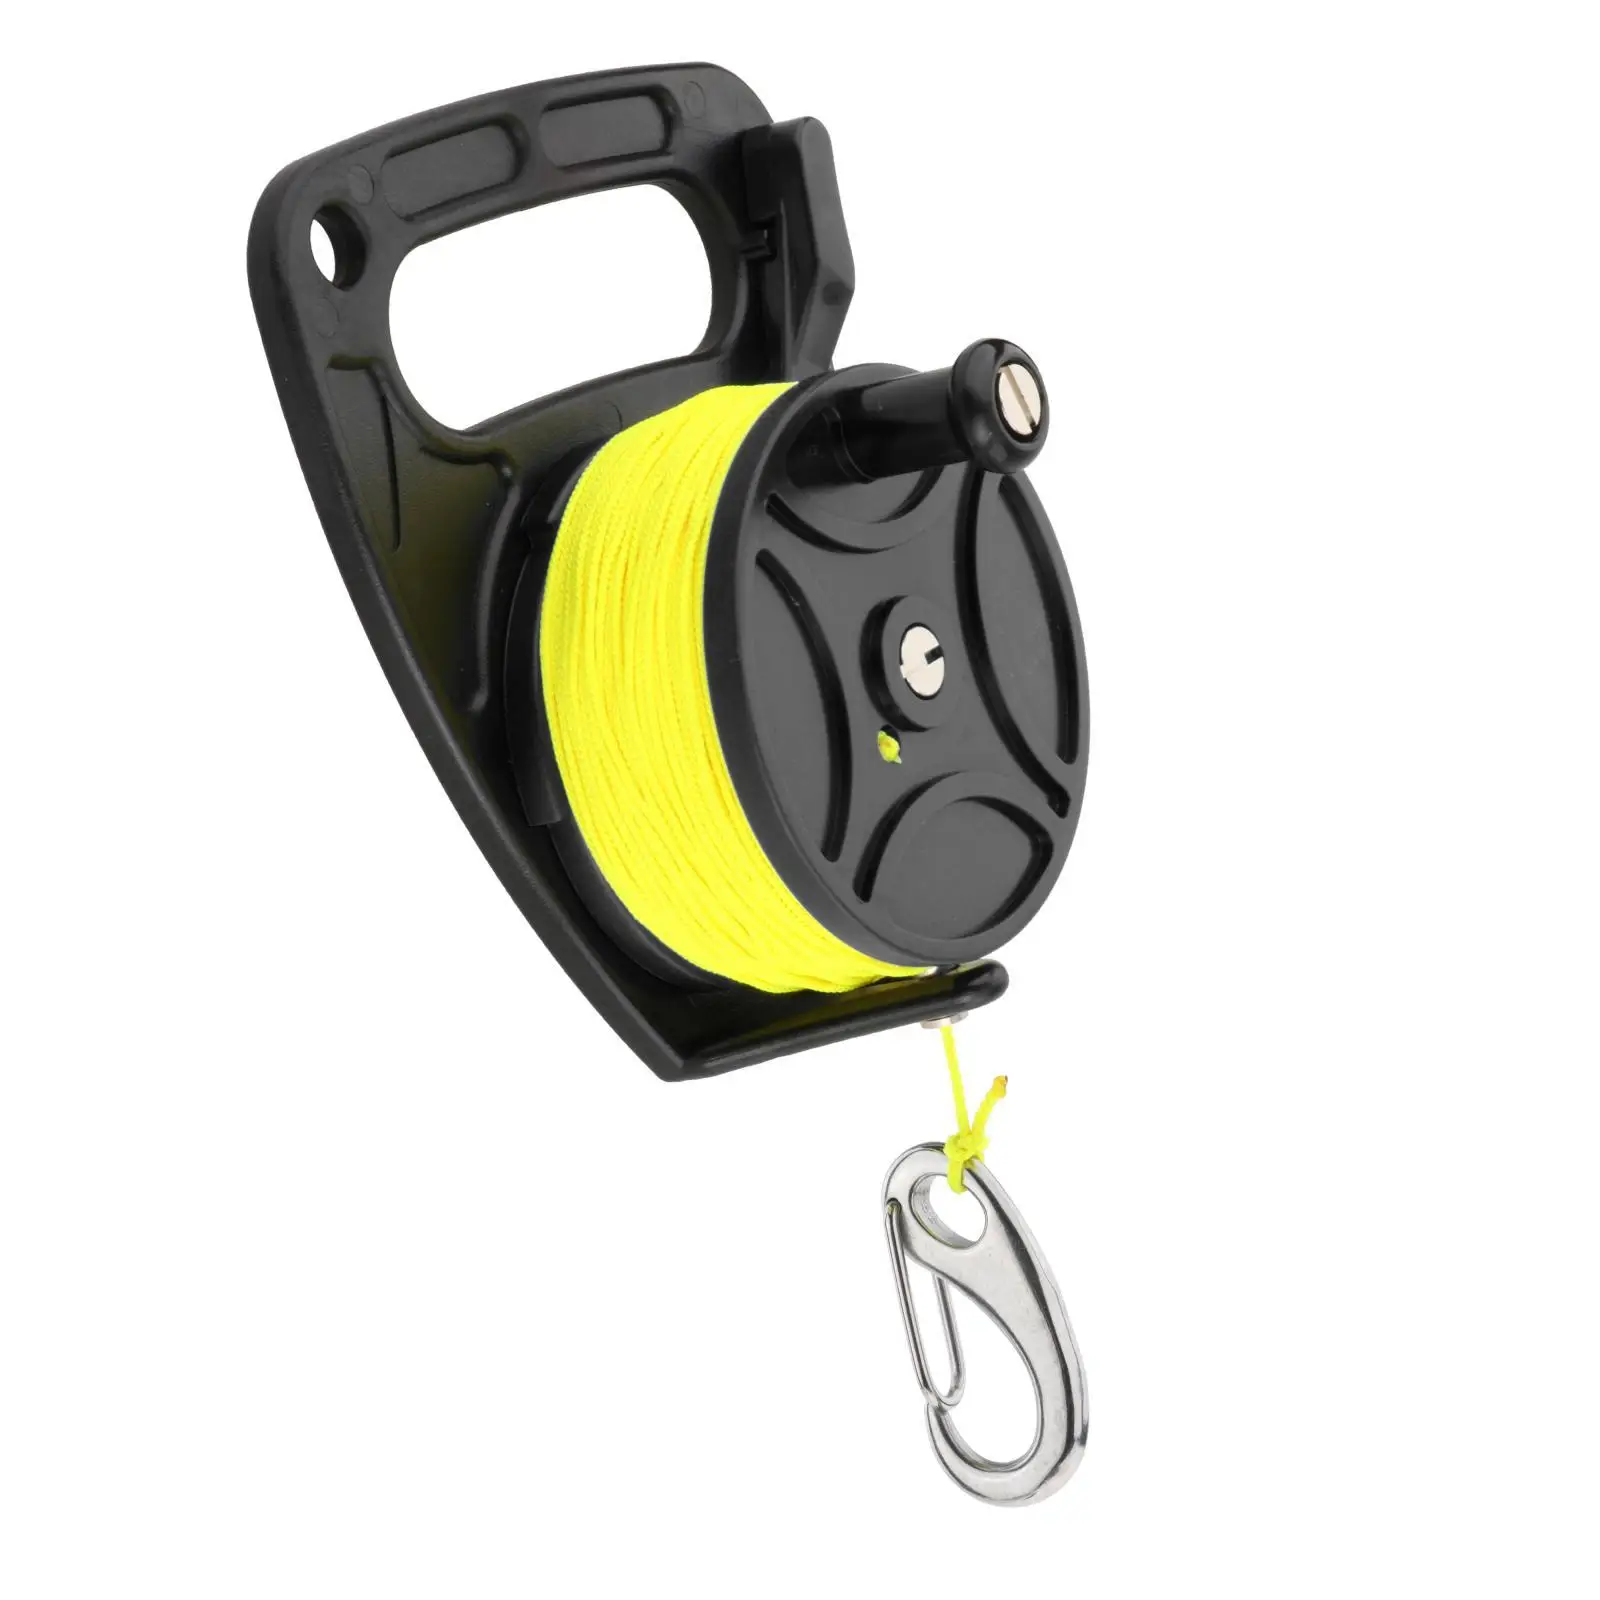 Multi-Purpose Scuba Diving Line Reel with Handle Kayak Anchor Yellow Line for Snorkeling Open Water Wreck Exploration Cave Dive